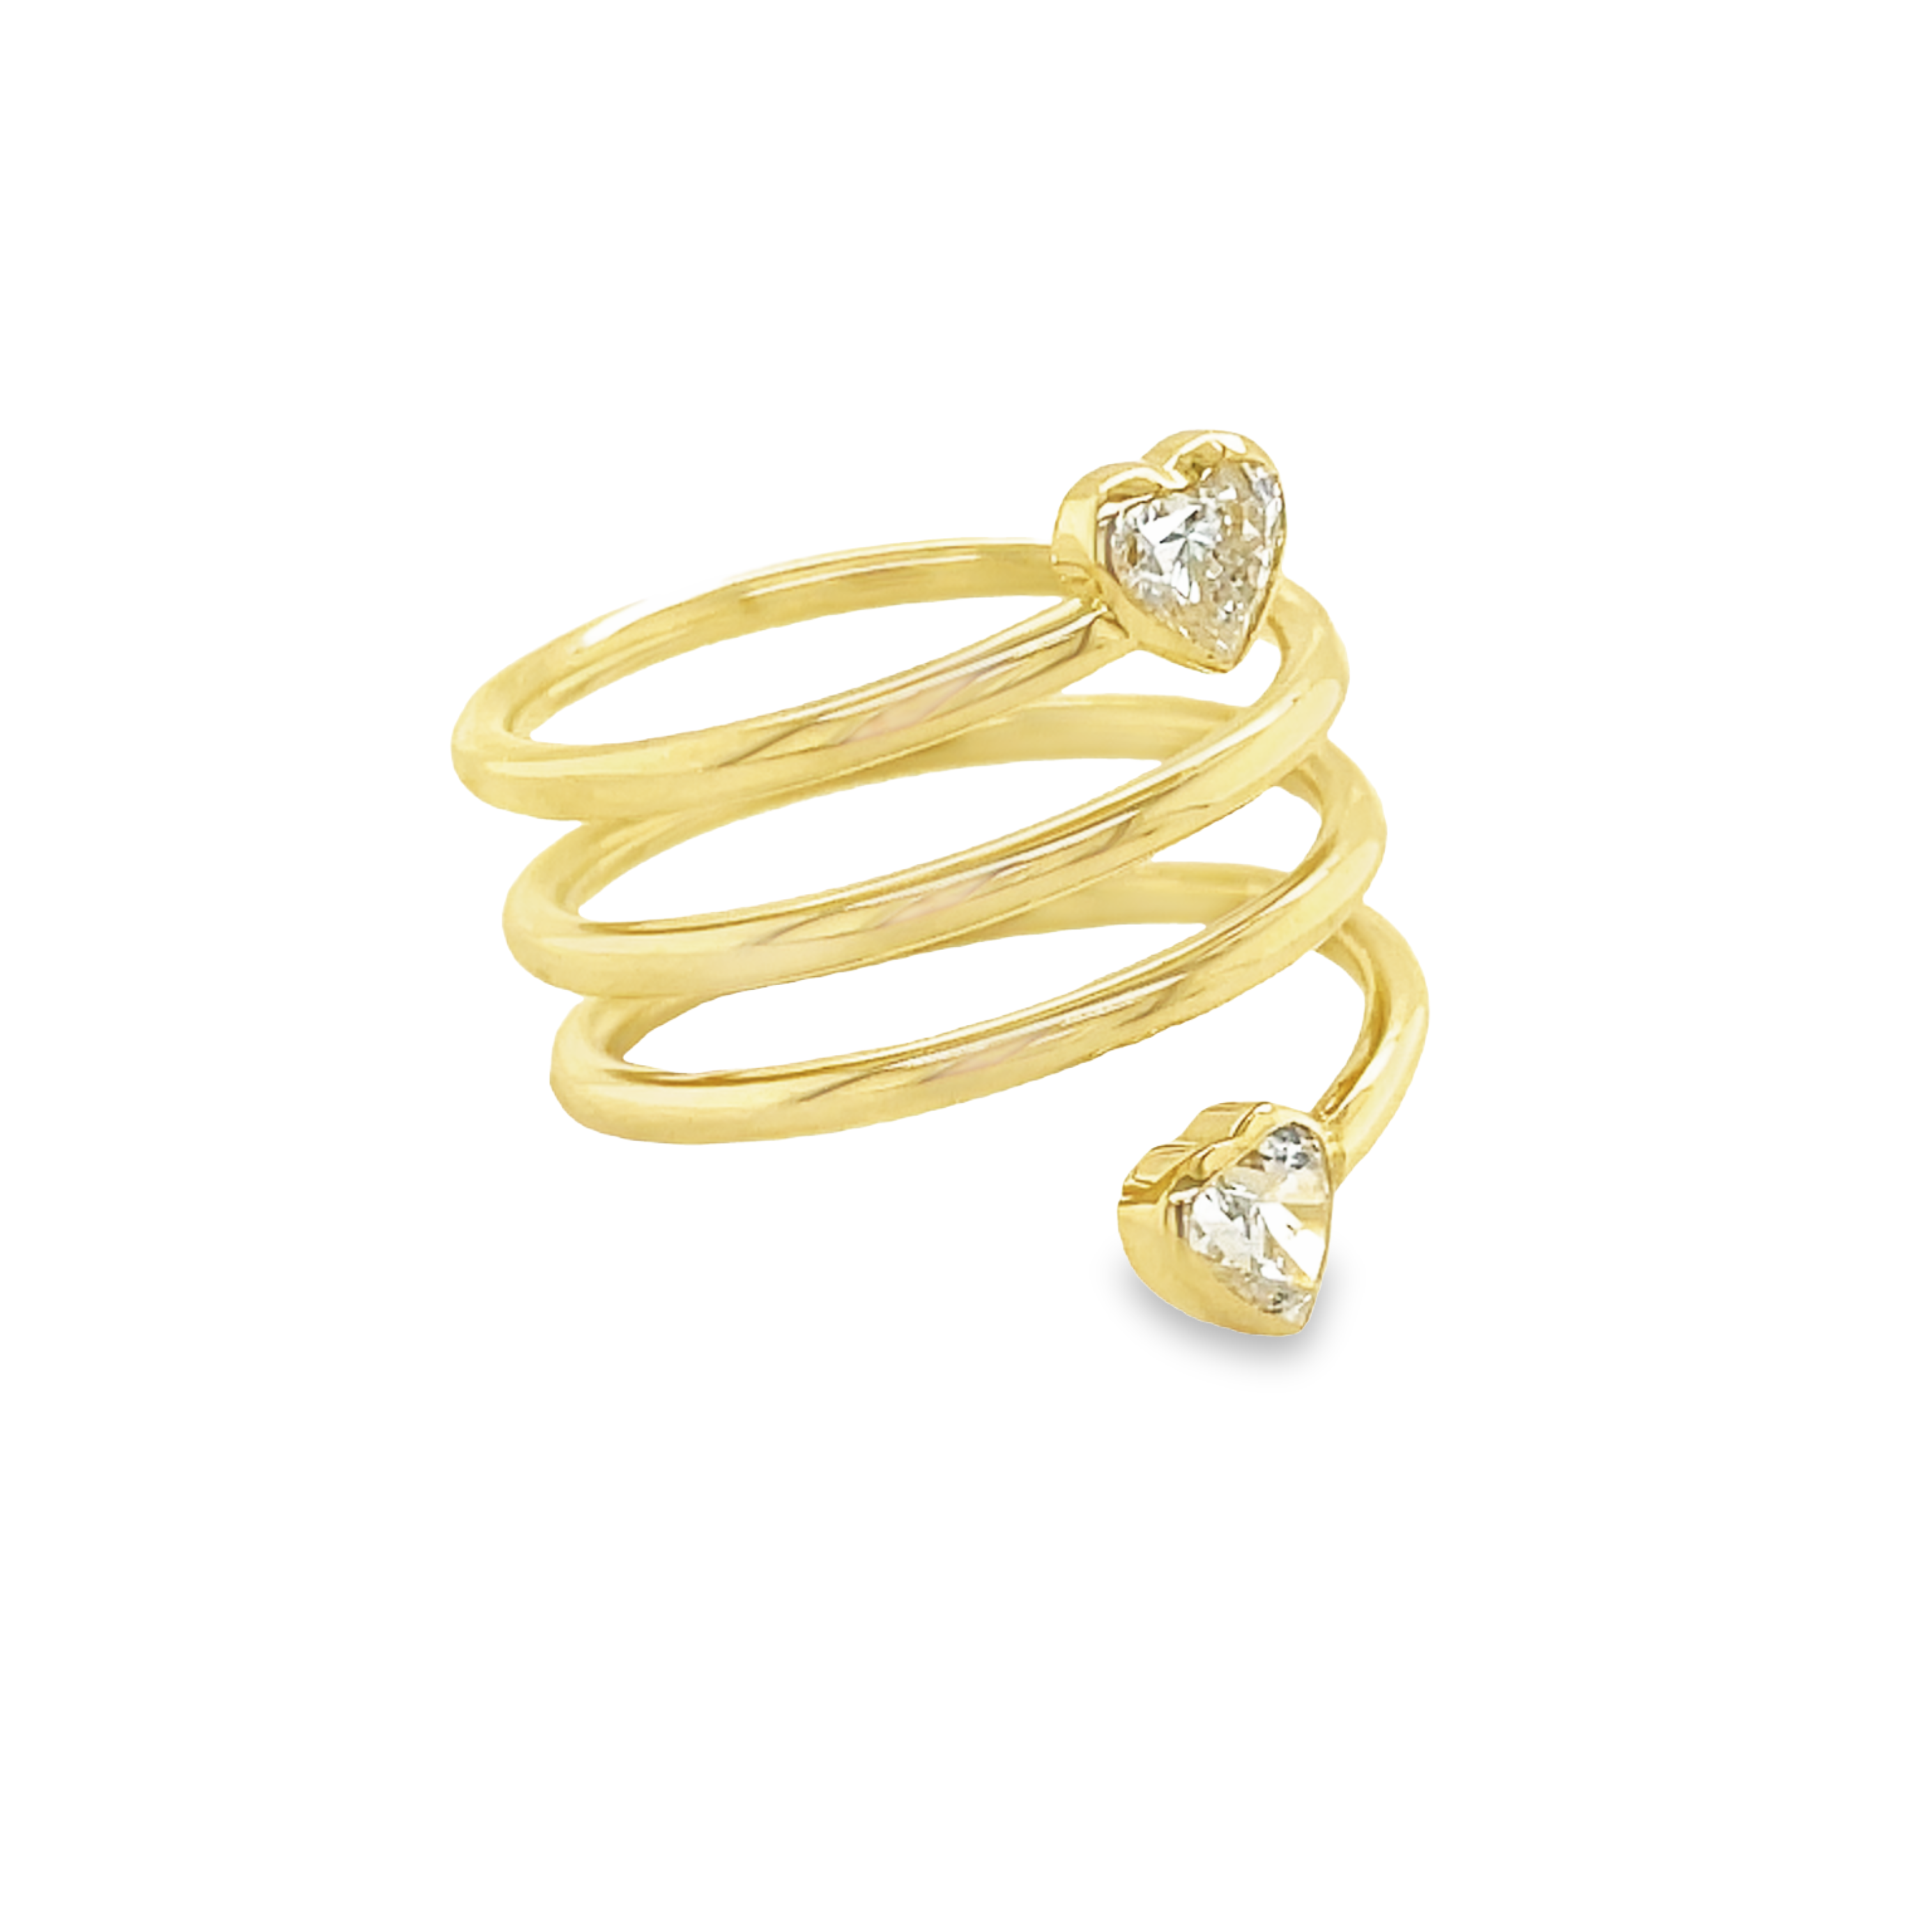 Definitely a perfect love piece  Set in 14k yellow gold  Round heart cut diamonds 0.50 cts  Wrap around style  20.00 wide